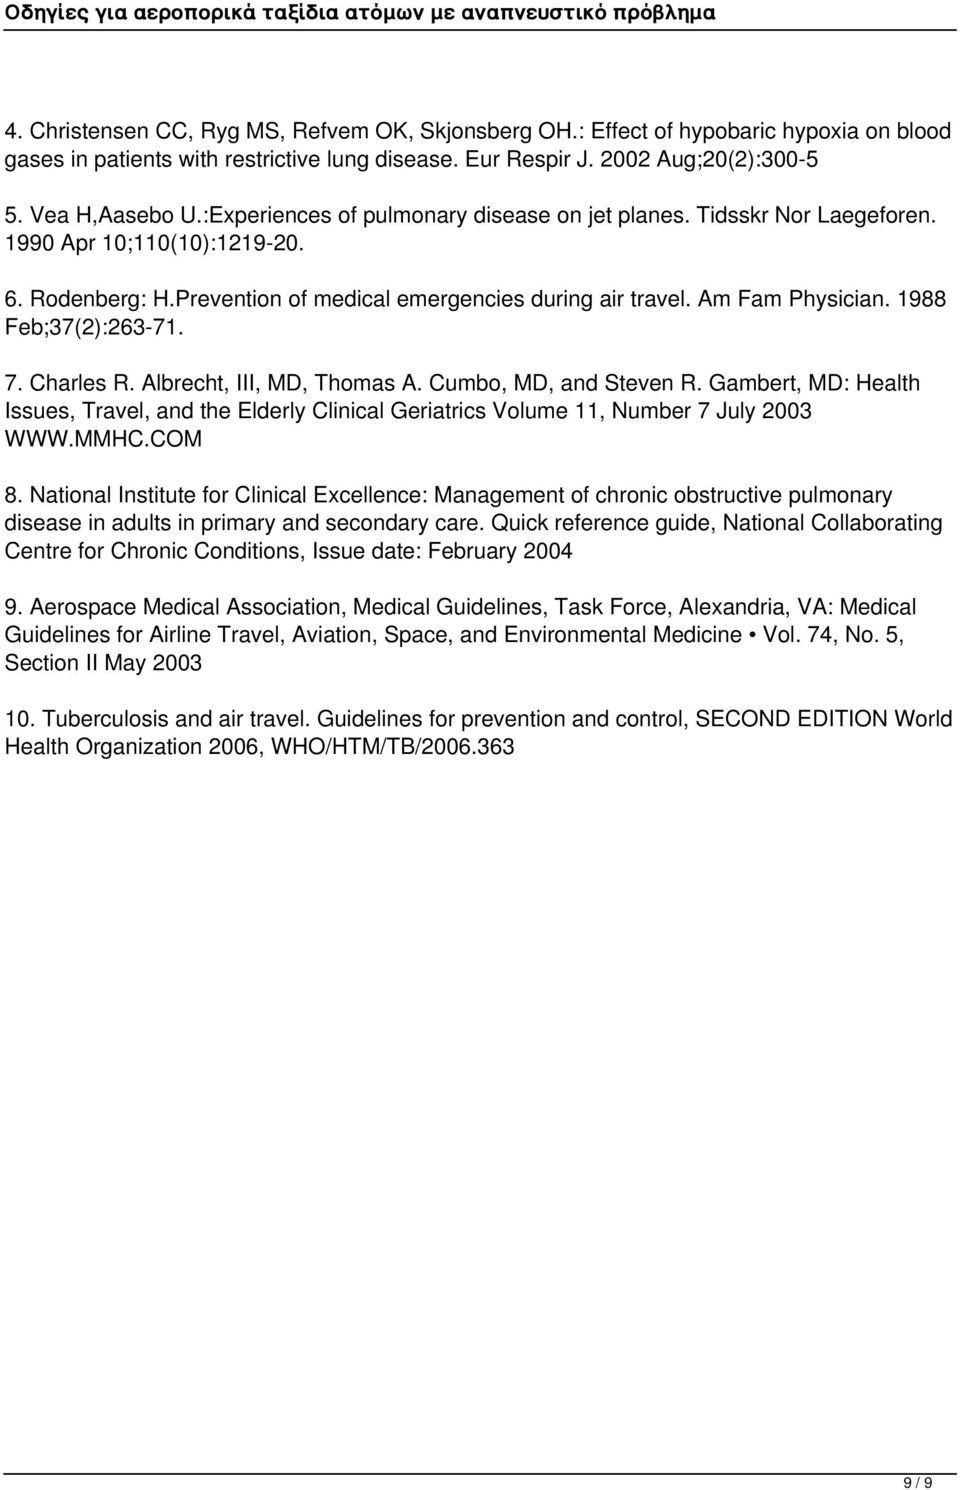 1988 Feb;37(2):263-71. 7. Charles R. Albrecht, III, MD, Thomas A. Cumbo, MD, and Steven R. Gambert, MD: Health Issues, Travel, and the Elderly Clinical Geriatrics Volume 11, Number 7 July 2003 WWW.